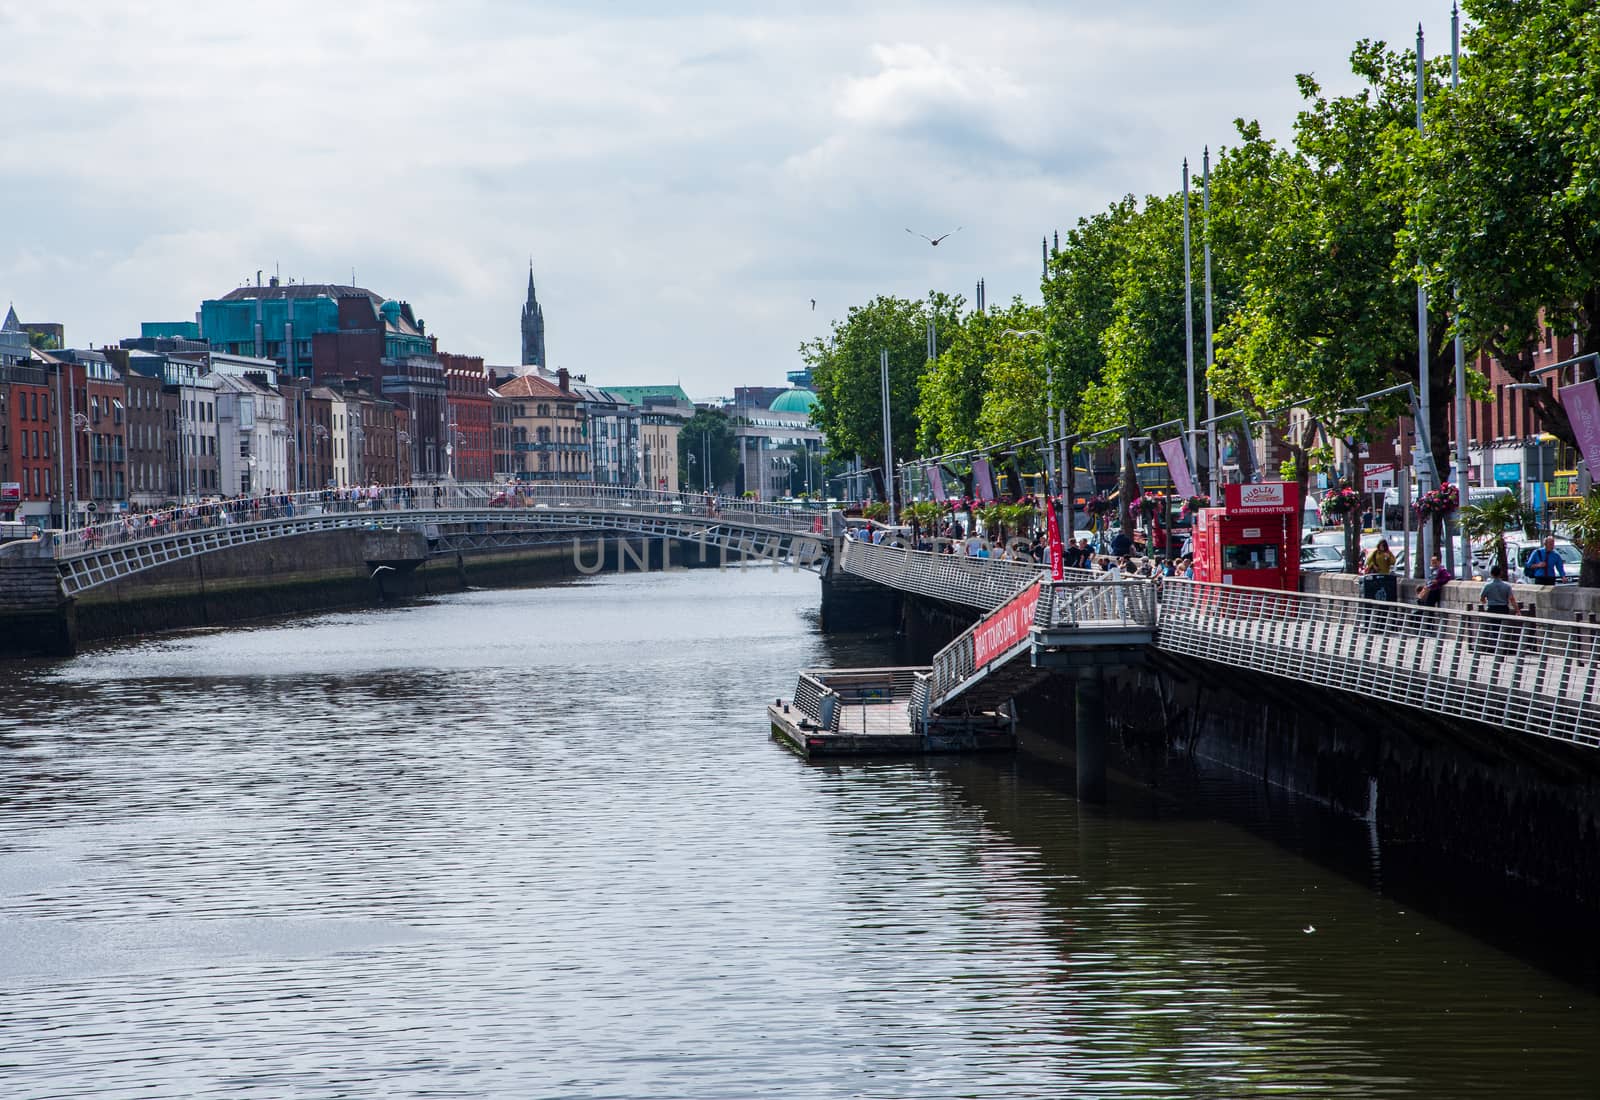 Dublin, Ireland -- July 9, 2018. The colorful banks of the River Liffey in Dublin, Ireland